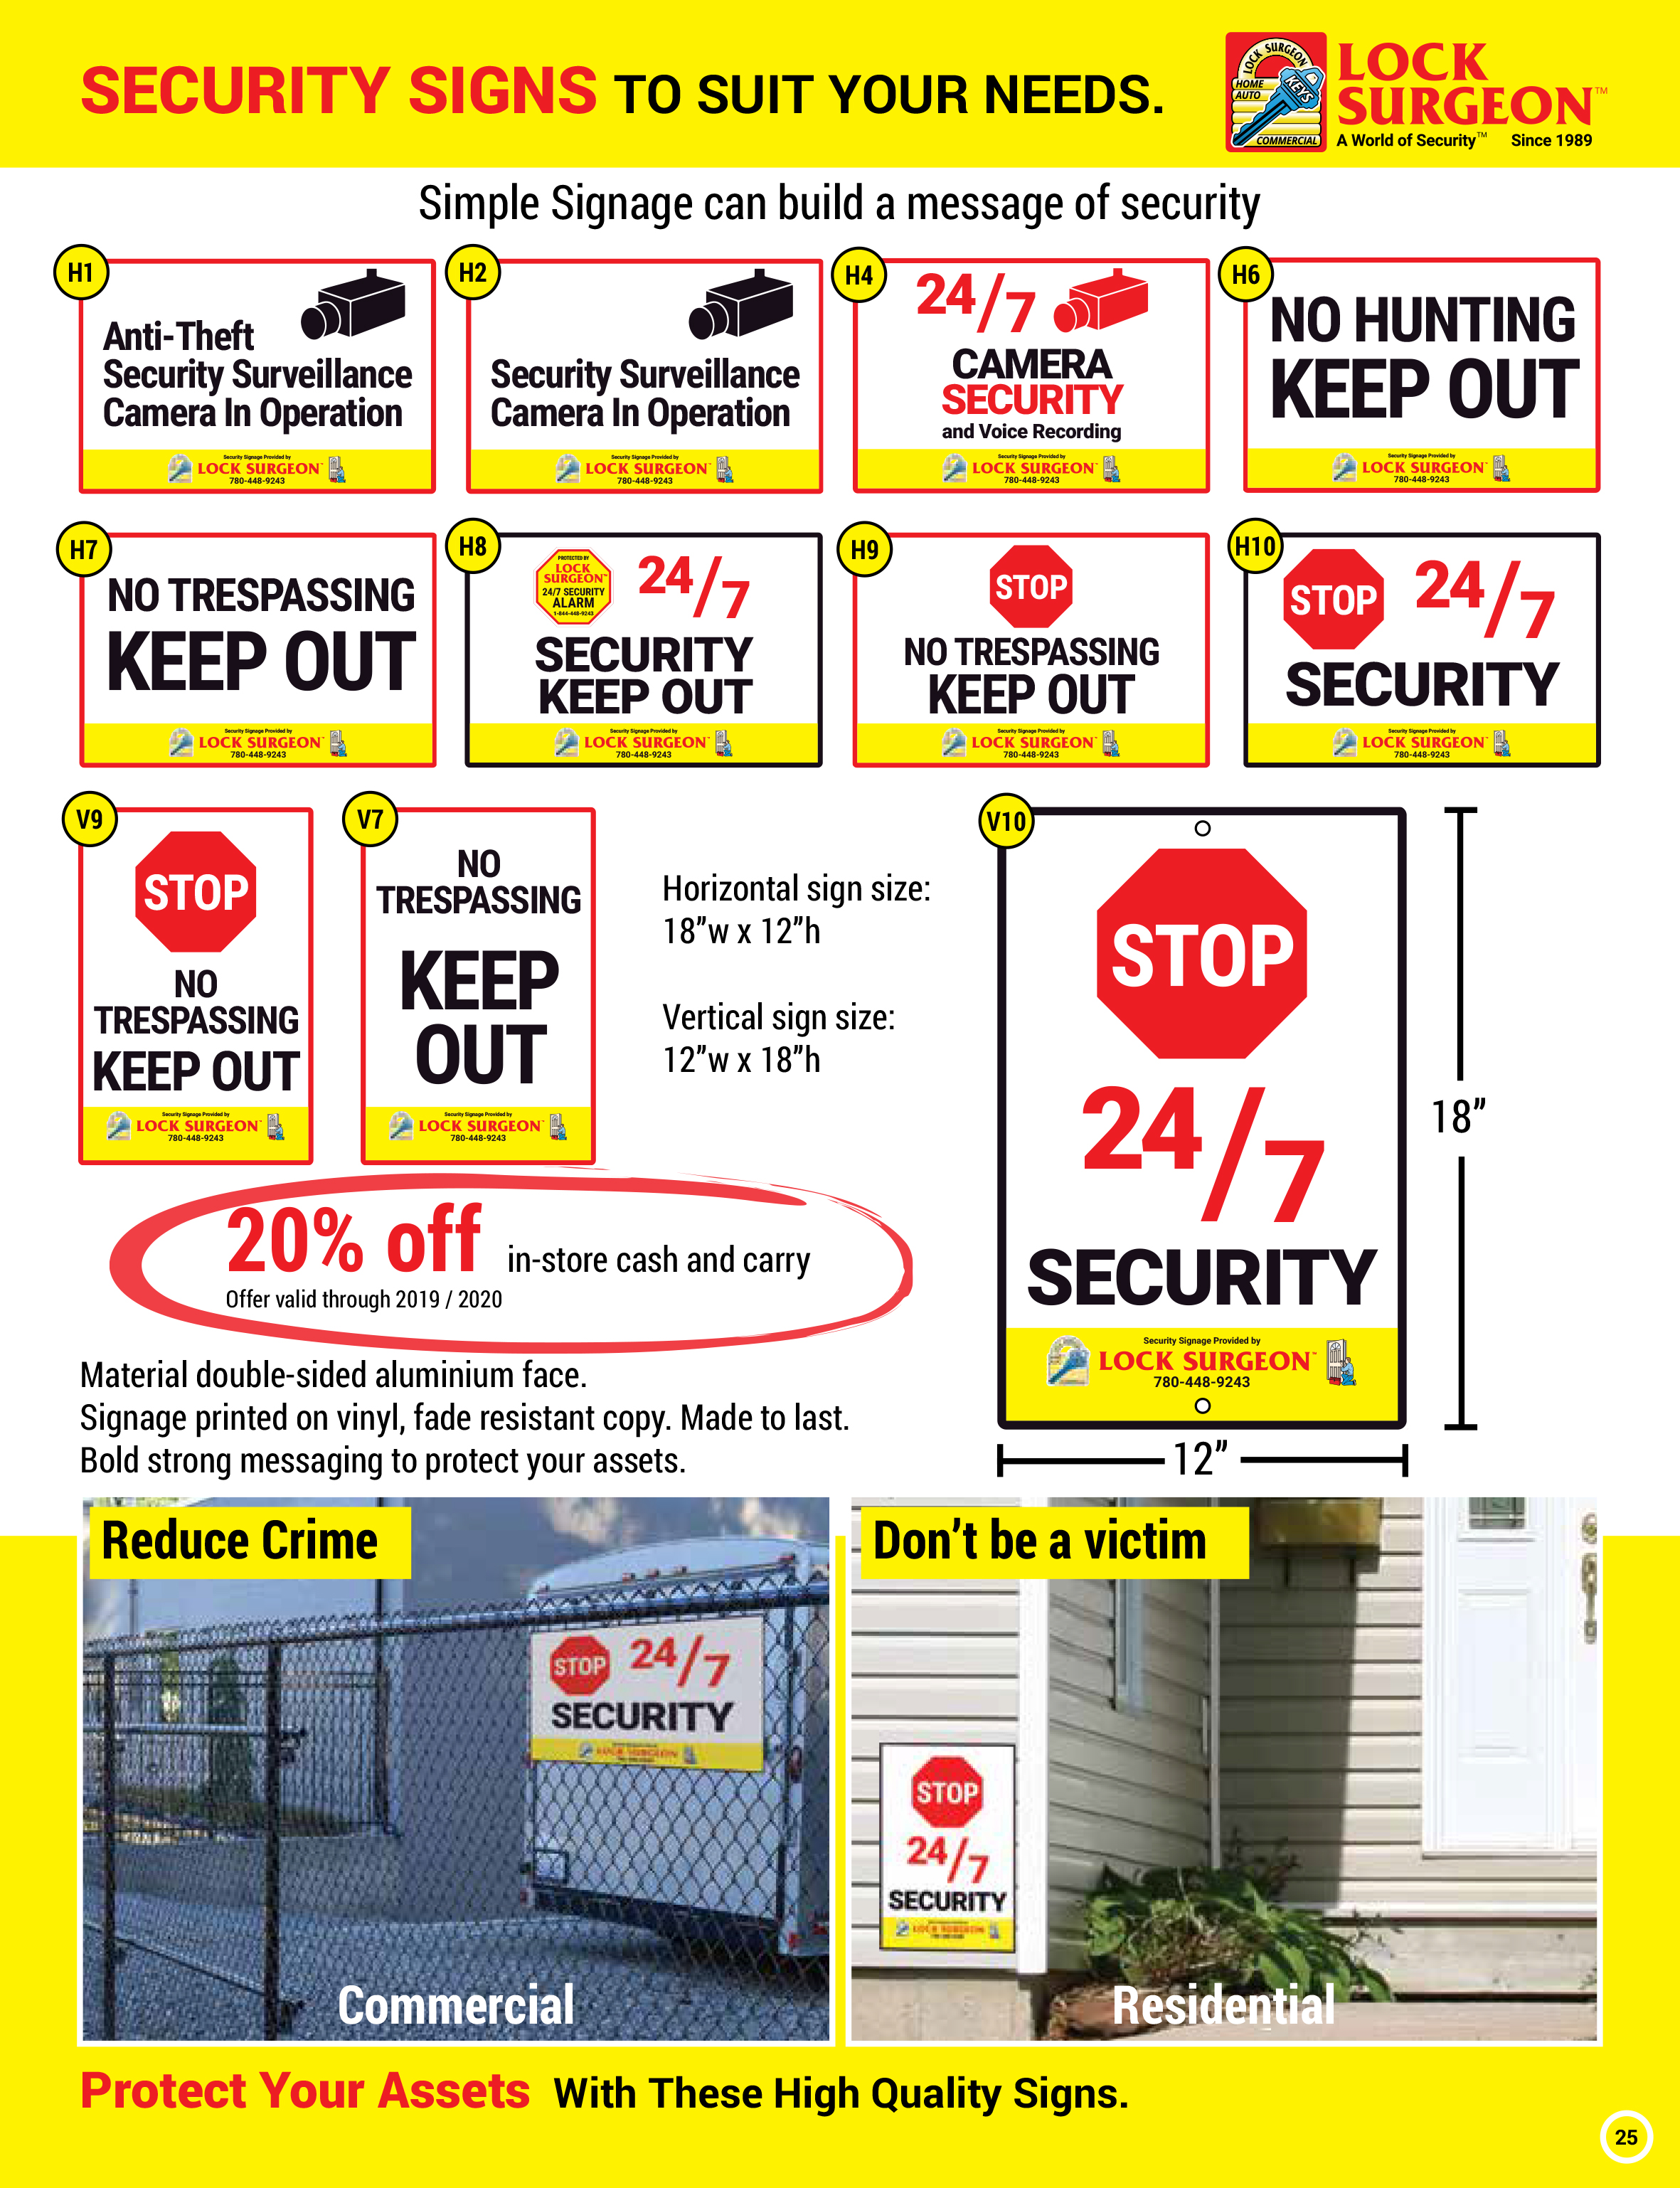 Standard security signage with a variety of messages to protect your assets and ward off criminals.